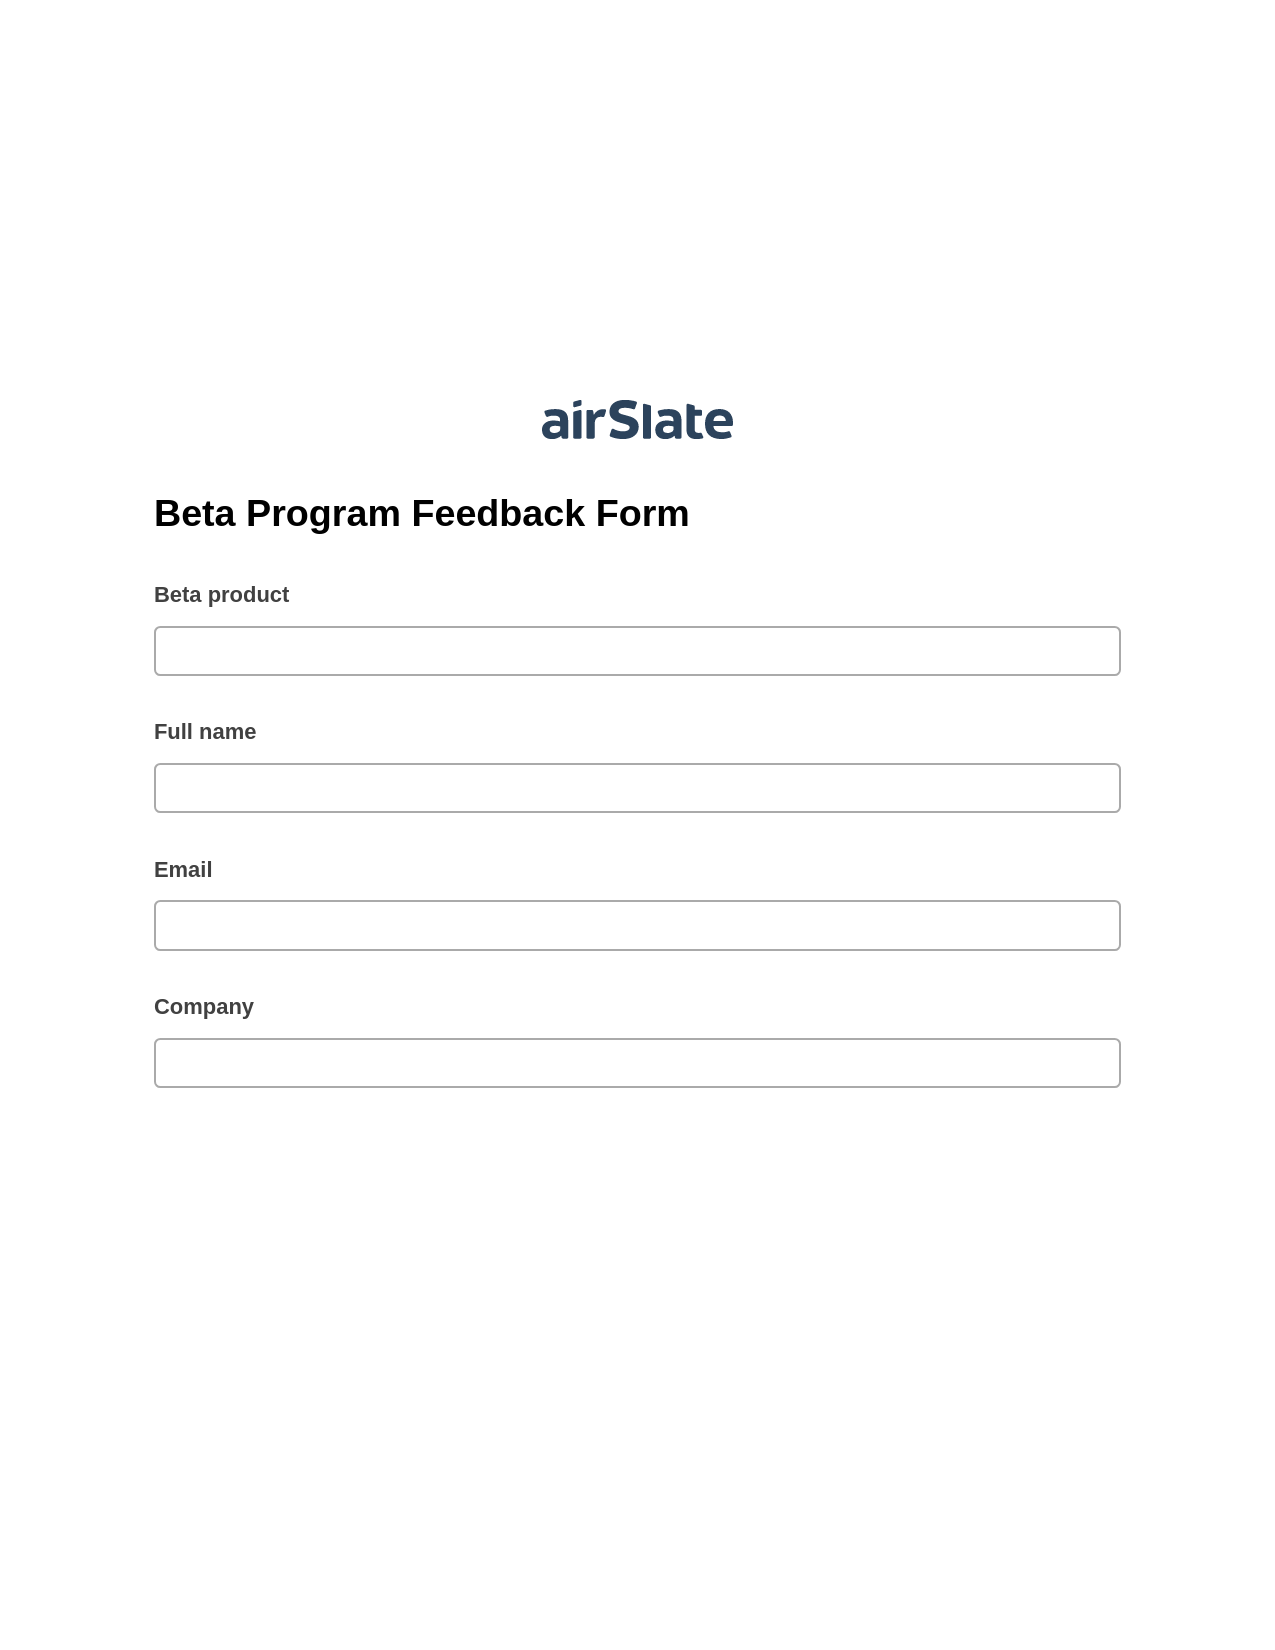 Beta Program Feedback Form Pre-fill Document Bot, Send a Slate with Roles Bot, Export to Smartsheet